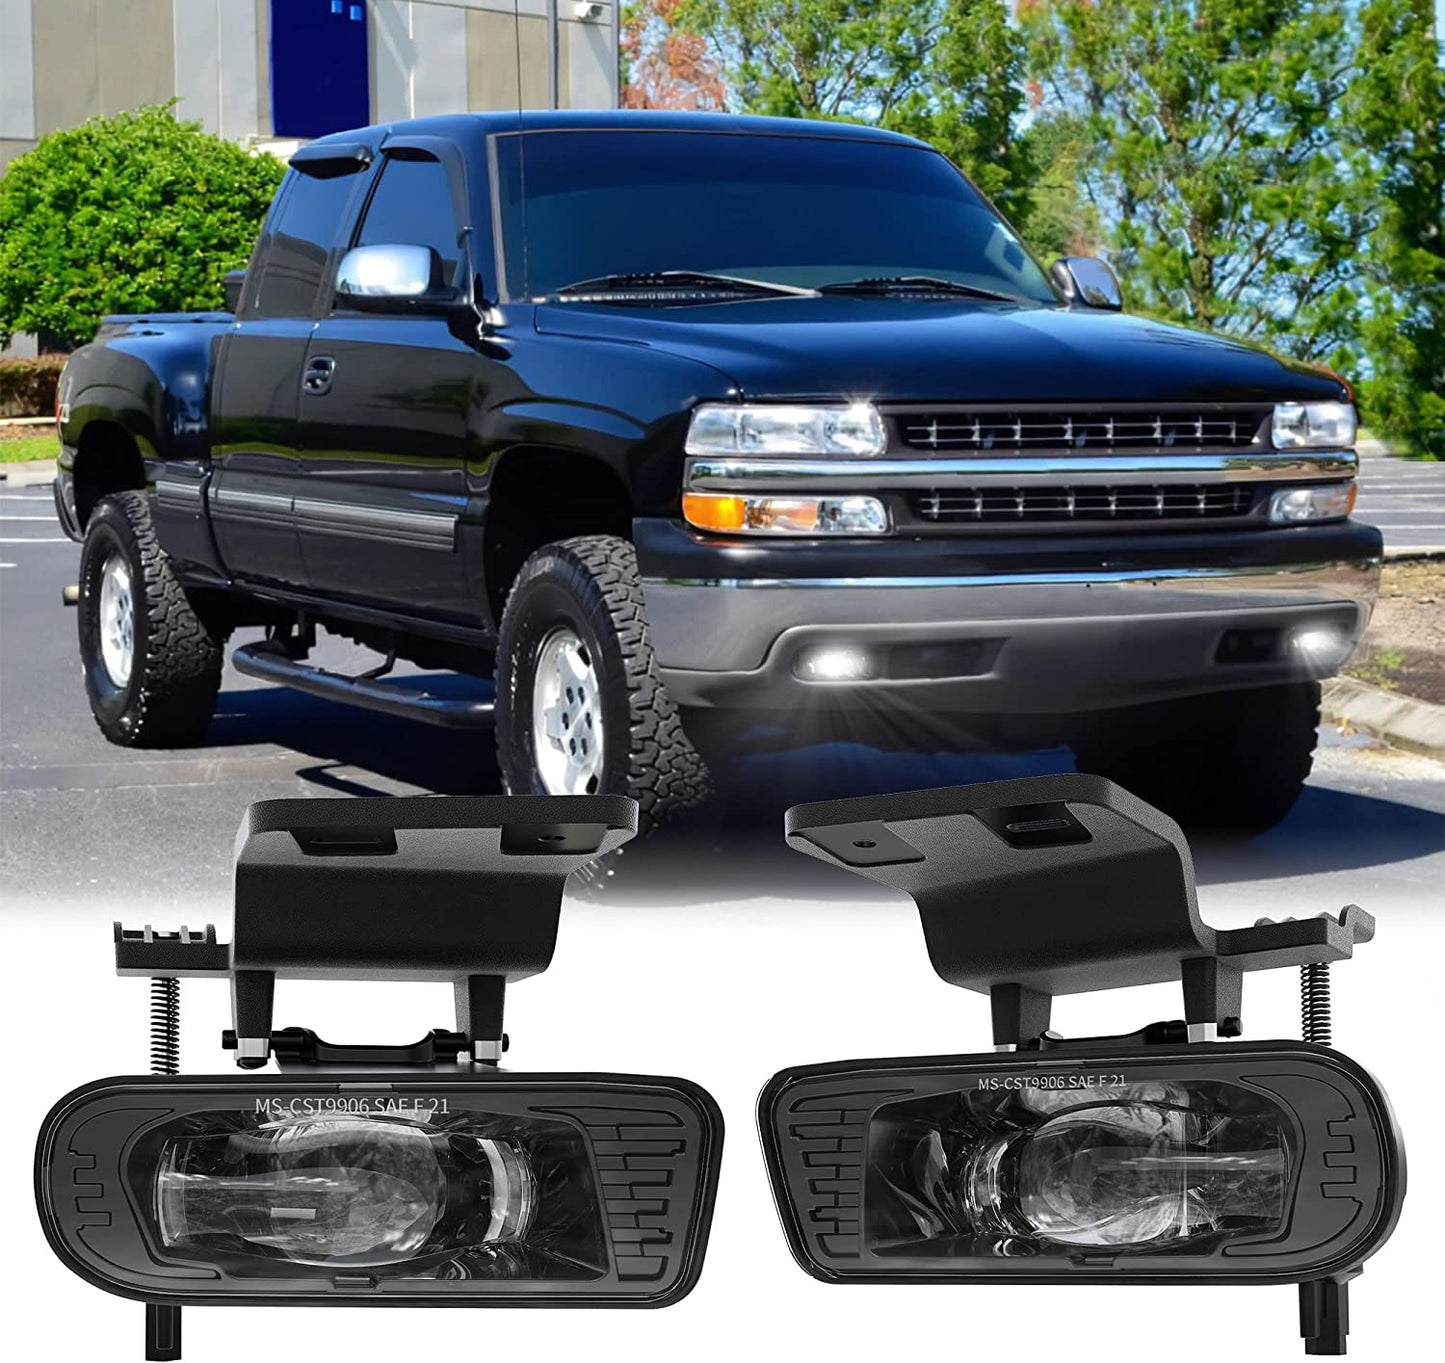 Upgraded LED Fog Lights Fog Lamps with Bulbs Compatible with 1999-2002 Chevy Silverado 1500 2500 3500